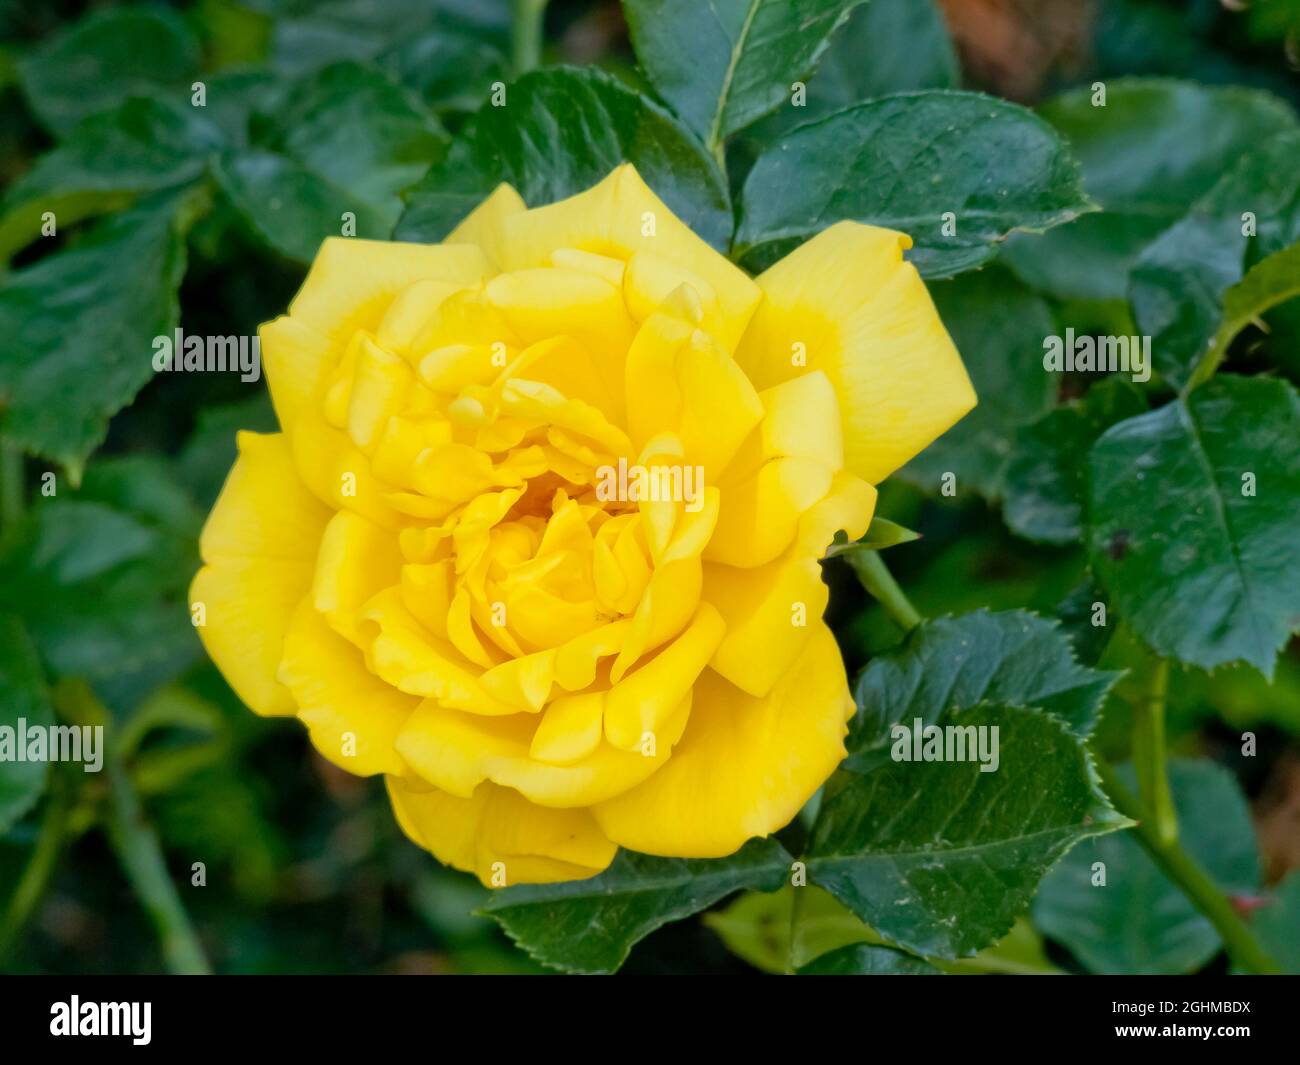 Rose tree 'Yellow Hammer' in bloom in a garden Stock Photo - Alamy